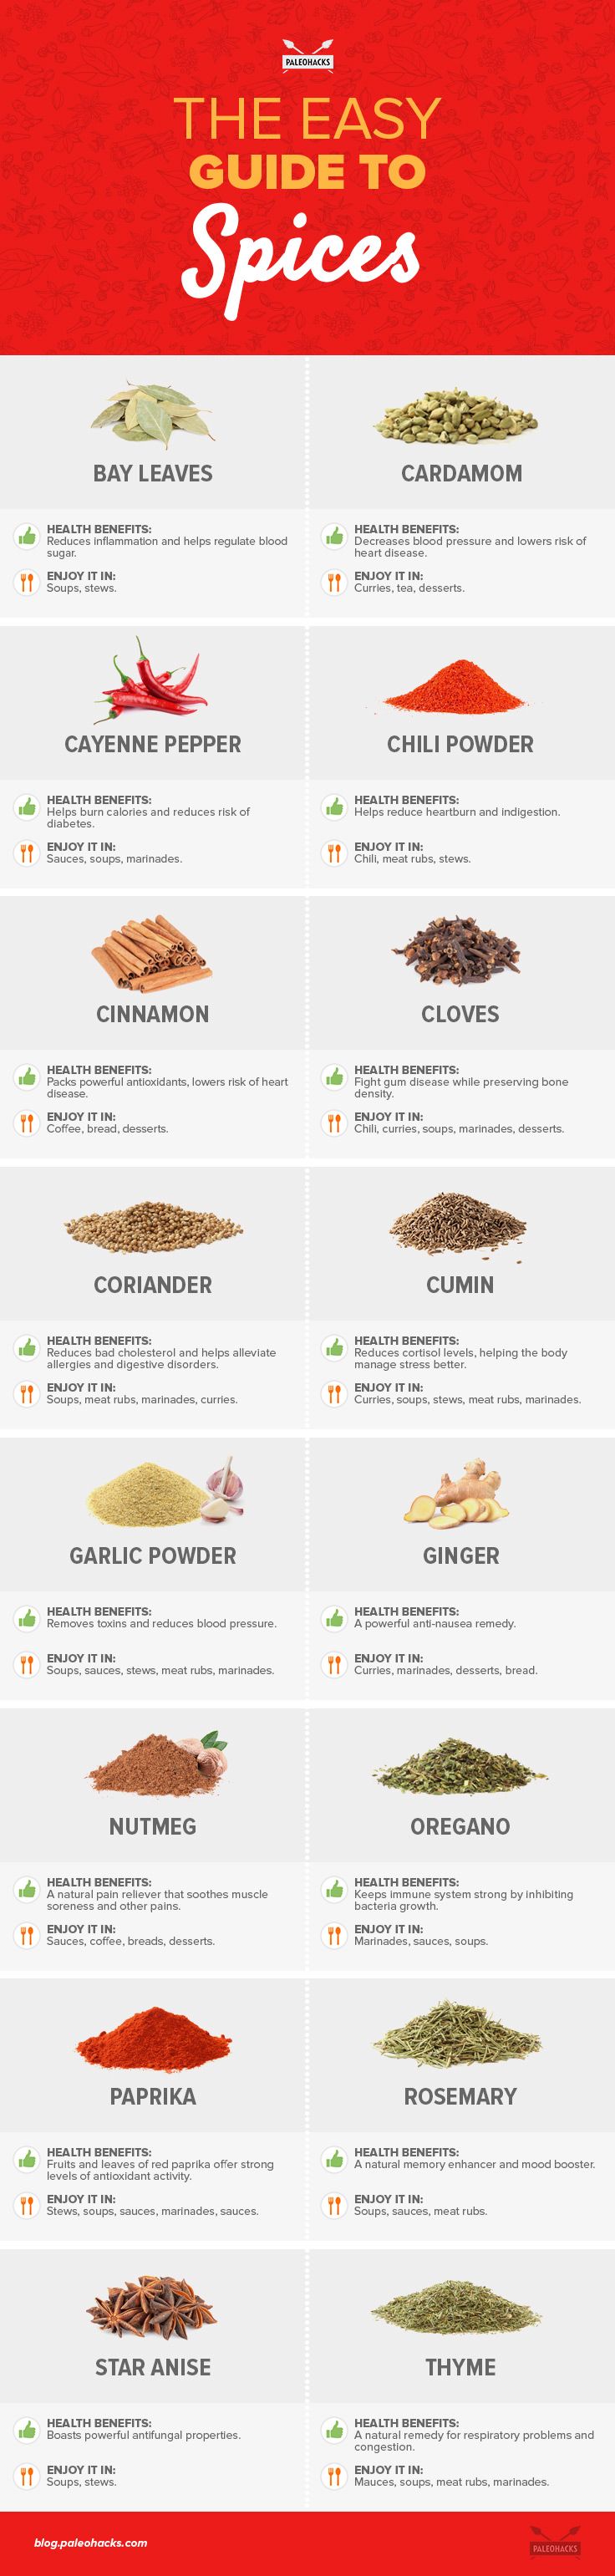 easy guide to spices infographic